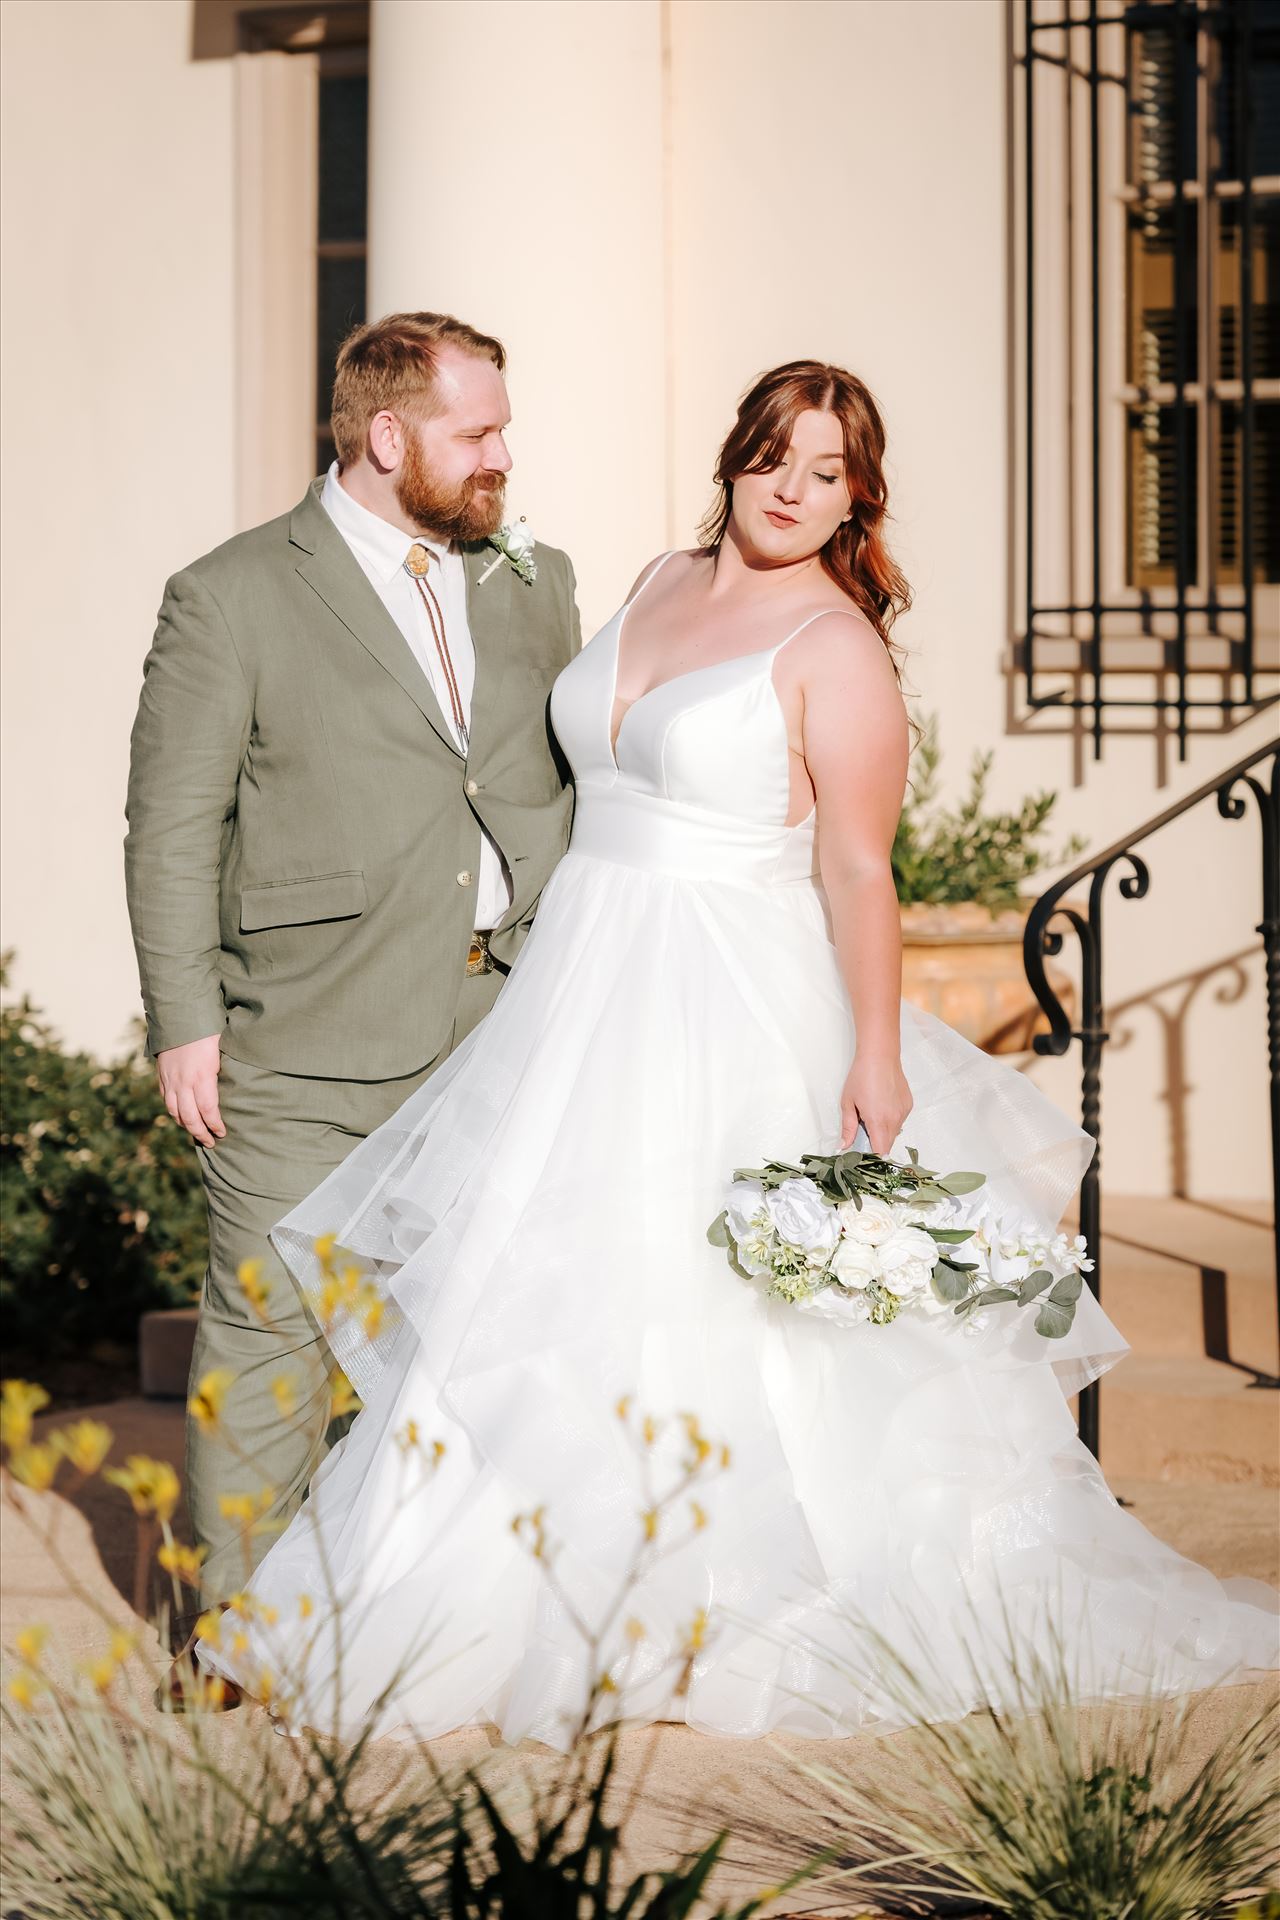 Final-4785.jpg - The Monday Club Wedding San Luis Obispo California in San Luis Obispo County by Mirror's Edge Photography.  Amazing venue for intimate weddings with mountain views. Classic Sunset Wedding Bride and Groom with boho chic flair. Classic Magazine Couple by Sarah Williams